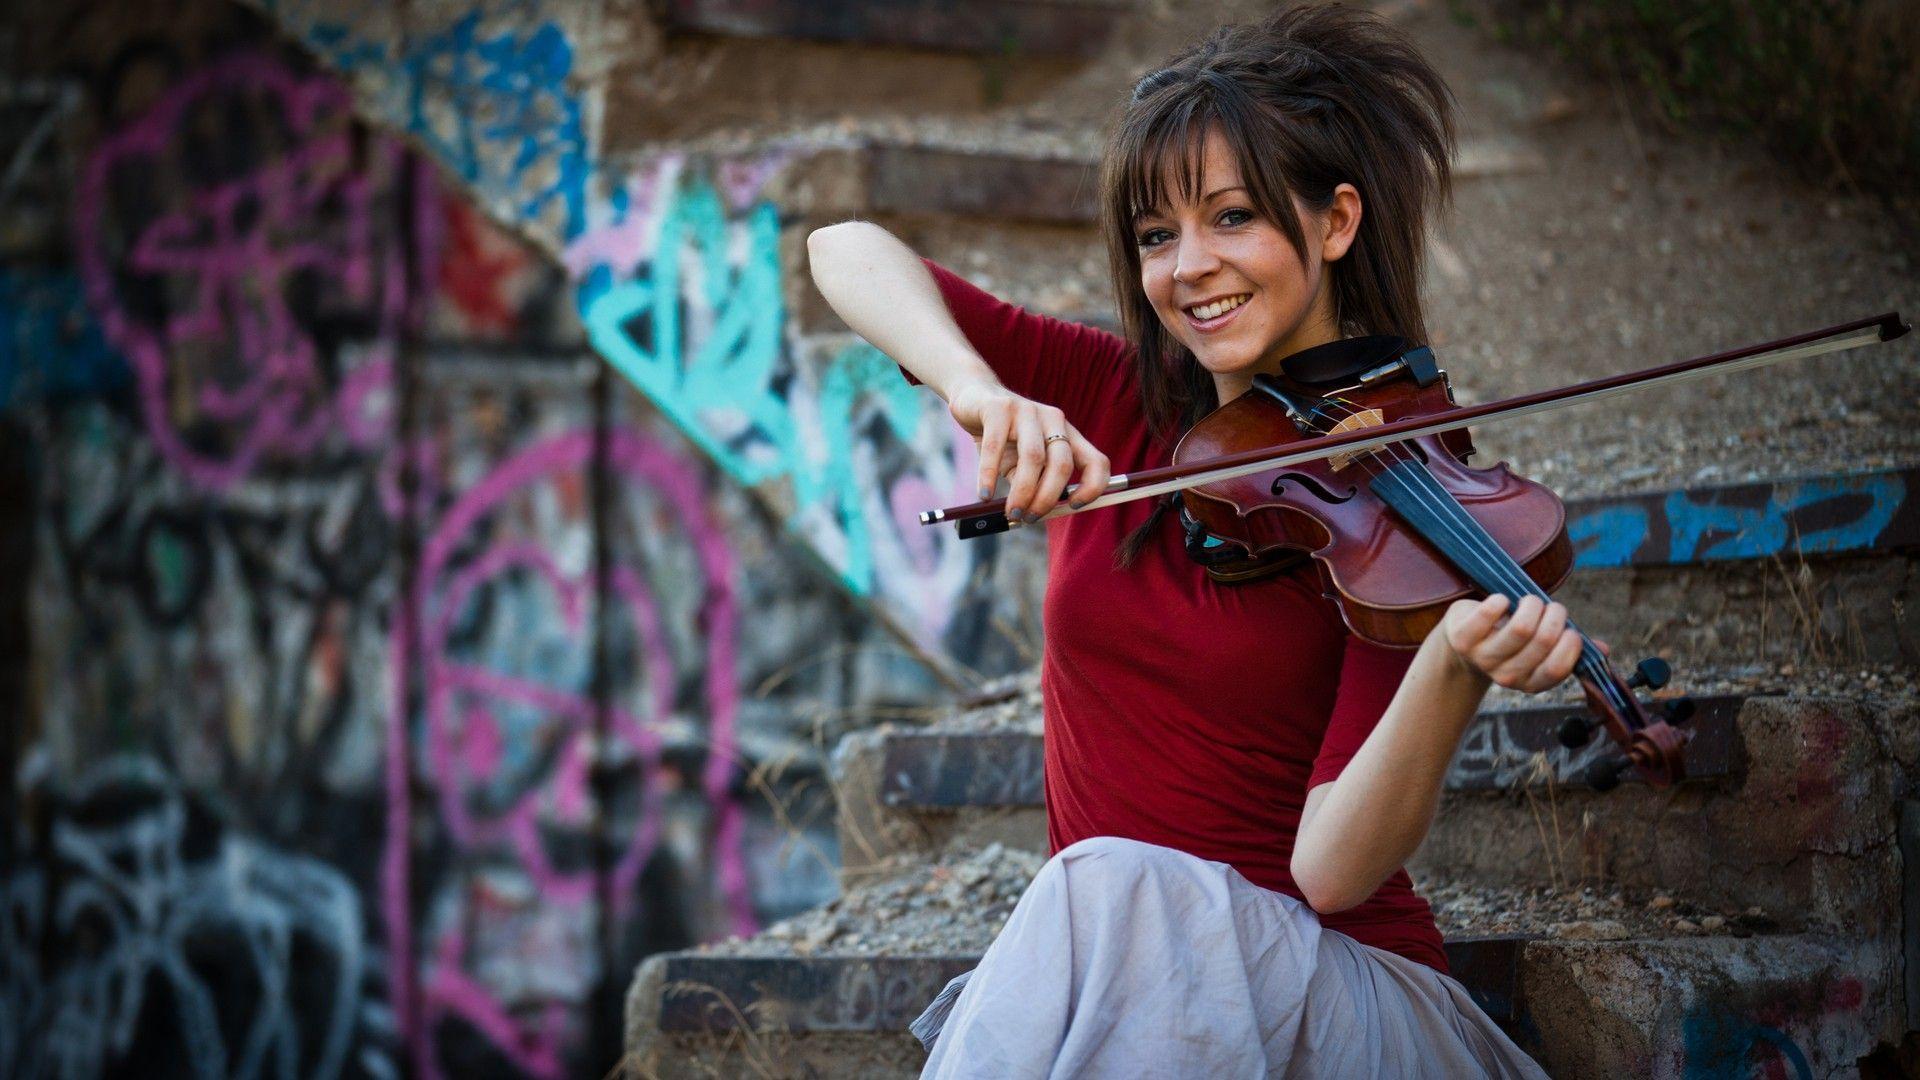 Happy Lindsey Stirling Wallpaper 51162 1920x1080 px